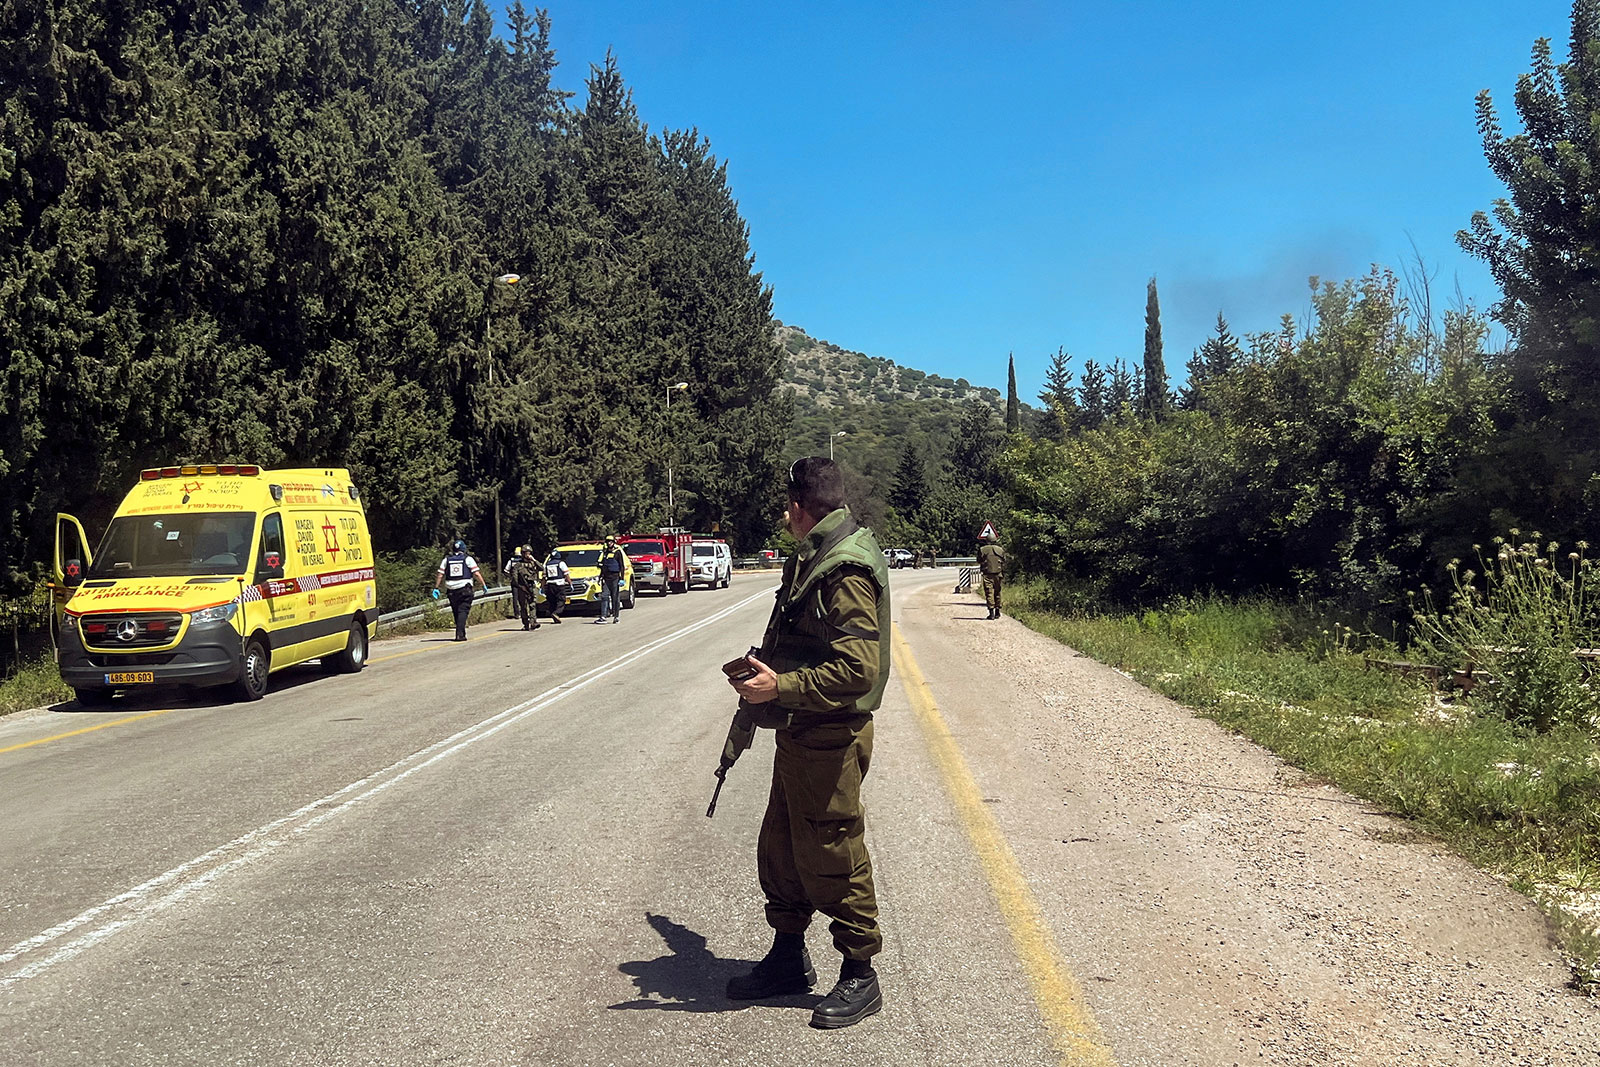 An Israeli soldier looks on at a scene, after it was reported that people were injured, near Arab al-Aramashe in northern Israel on Wednesday.